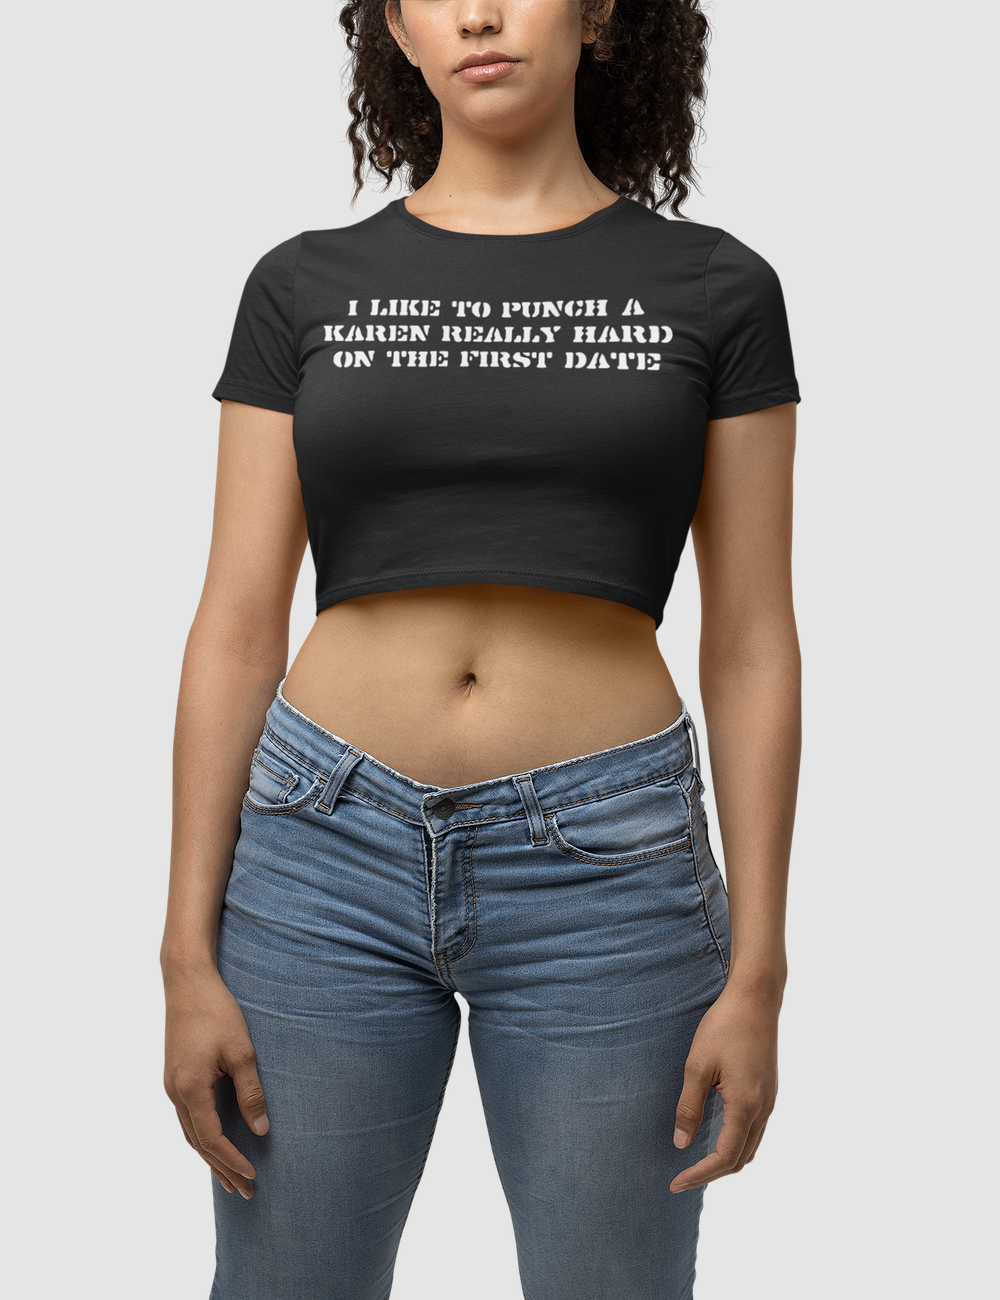 I Like To Punch A Karen Really Hard On The First Date Women's Fitted Crop Top T-Shirt OniTakai